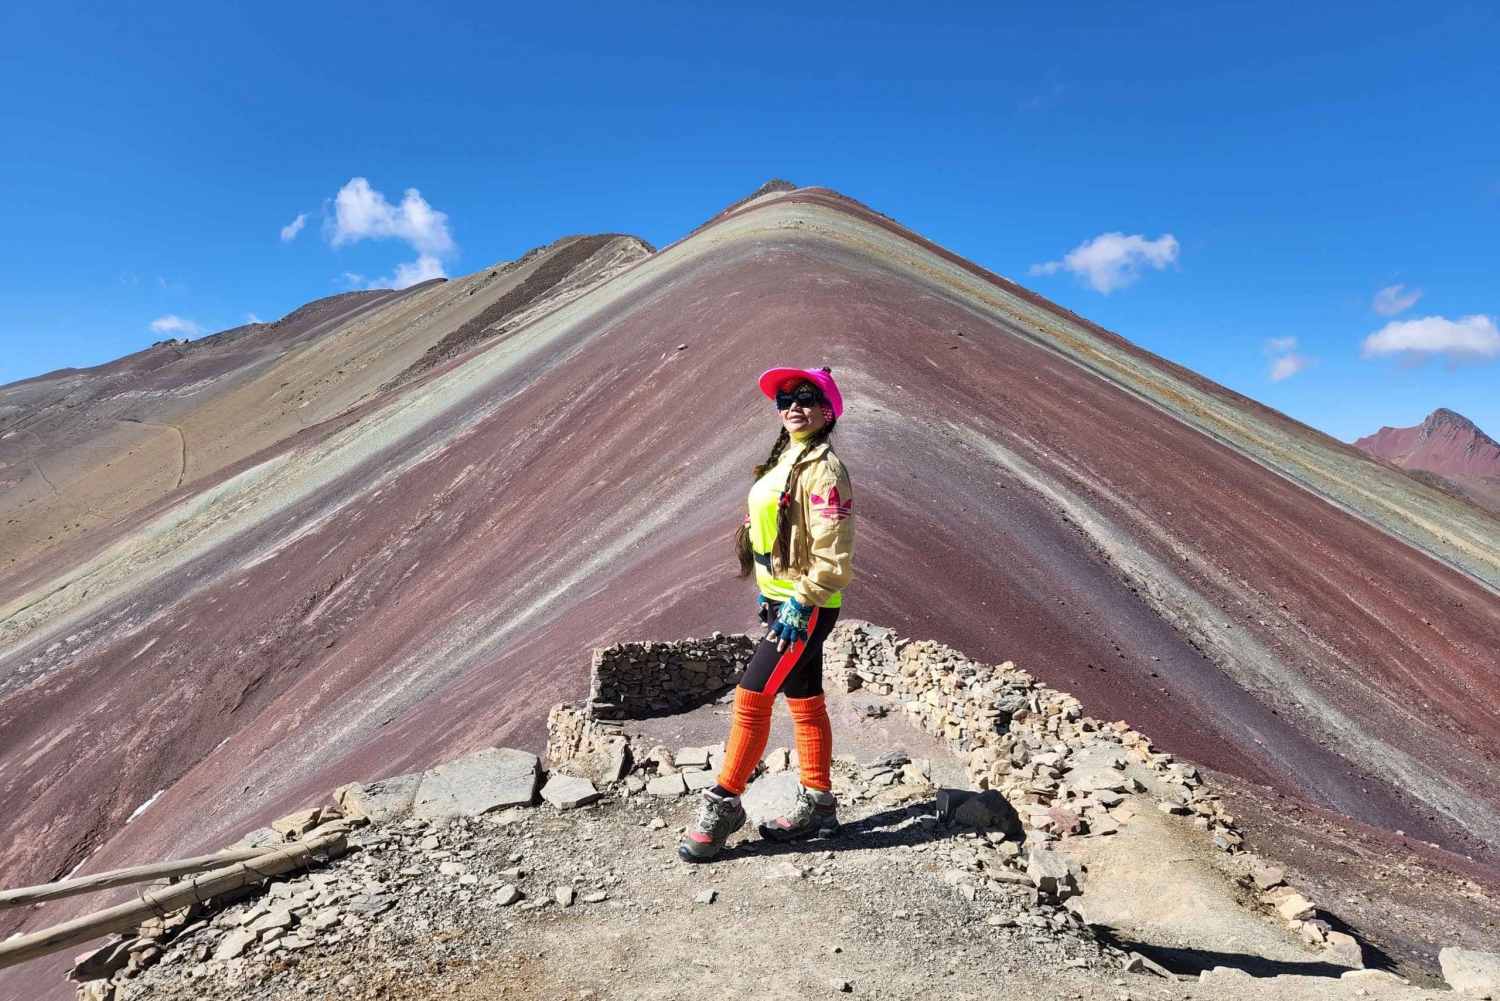 From Cusco: Rainbow Mountain Tour with Atvs